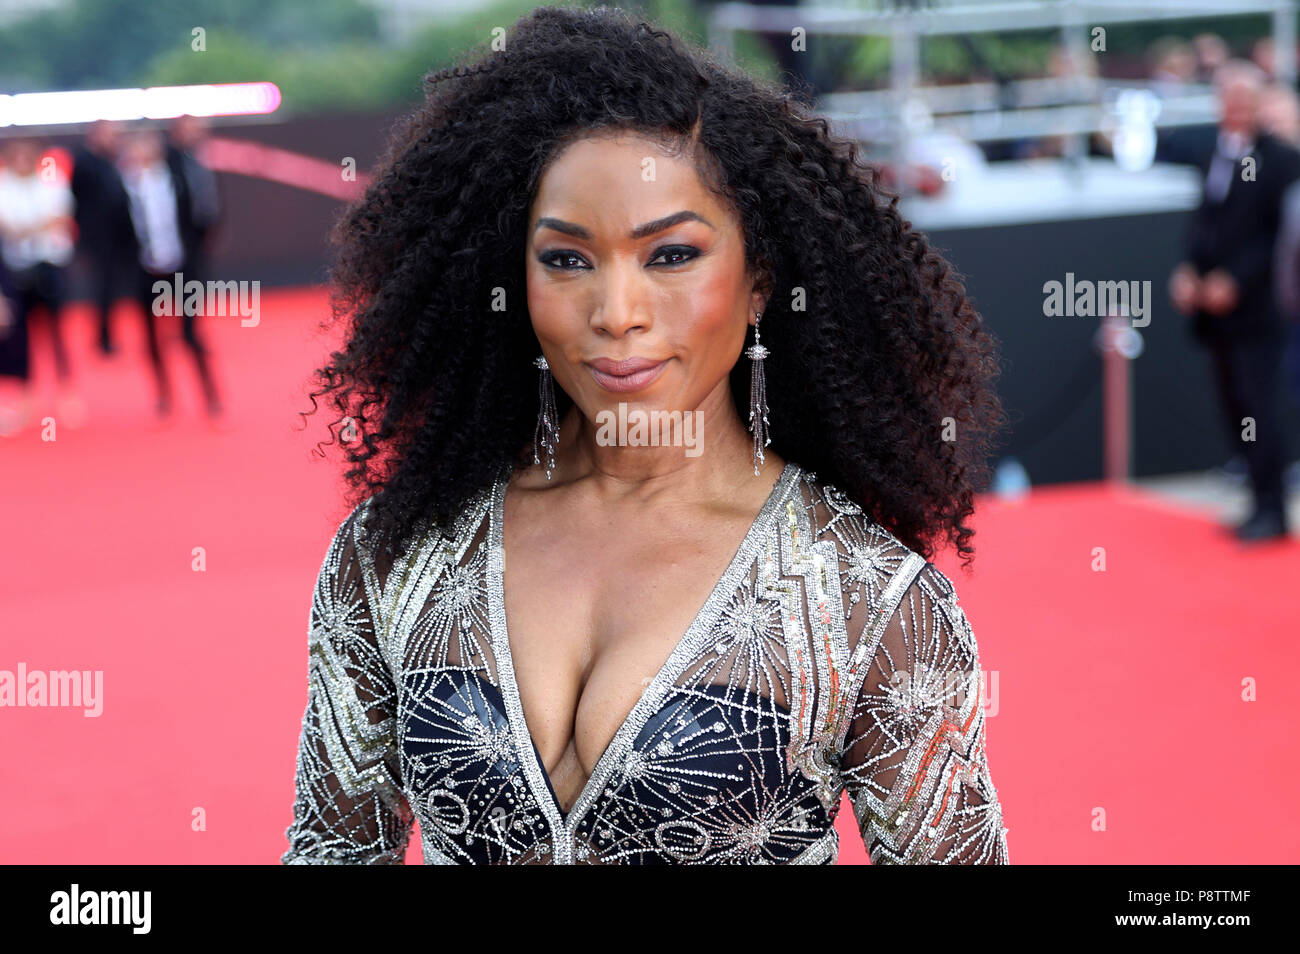 Angela Bassett attending the 'Mission: Impossible - Fallout' world premiere at Palais de Chaillot on July 12, 2018 in Paris, France. Stock Photo